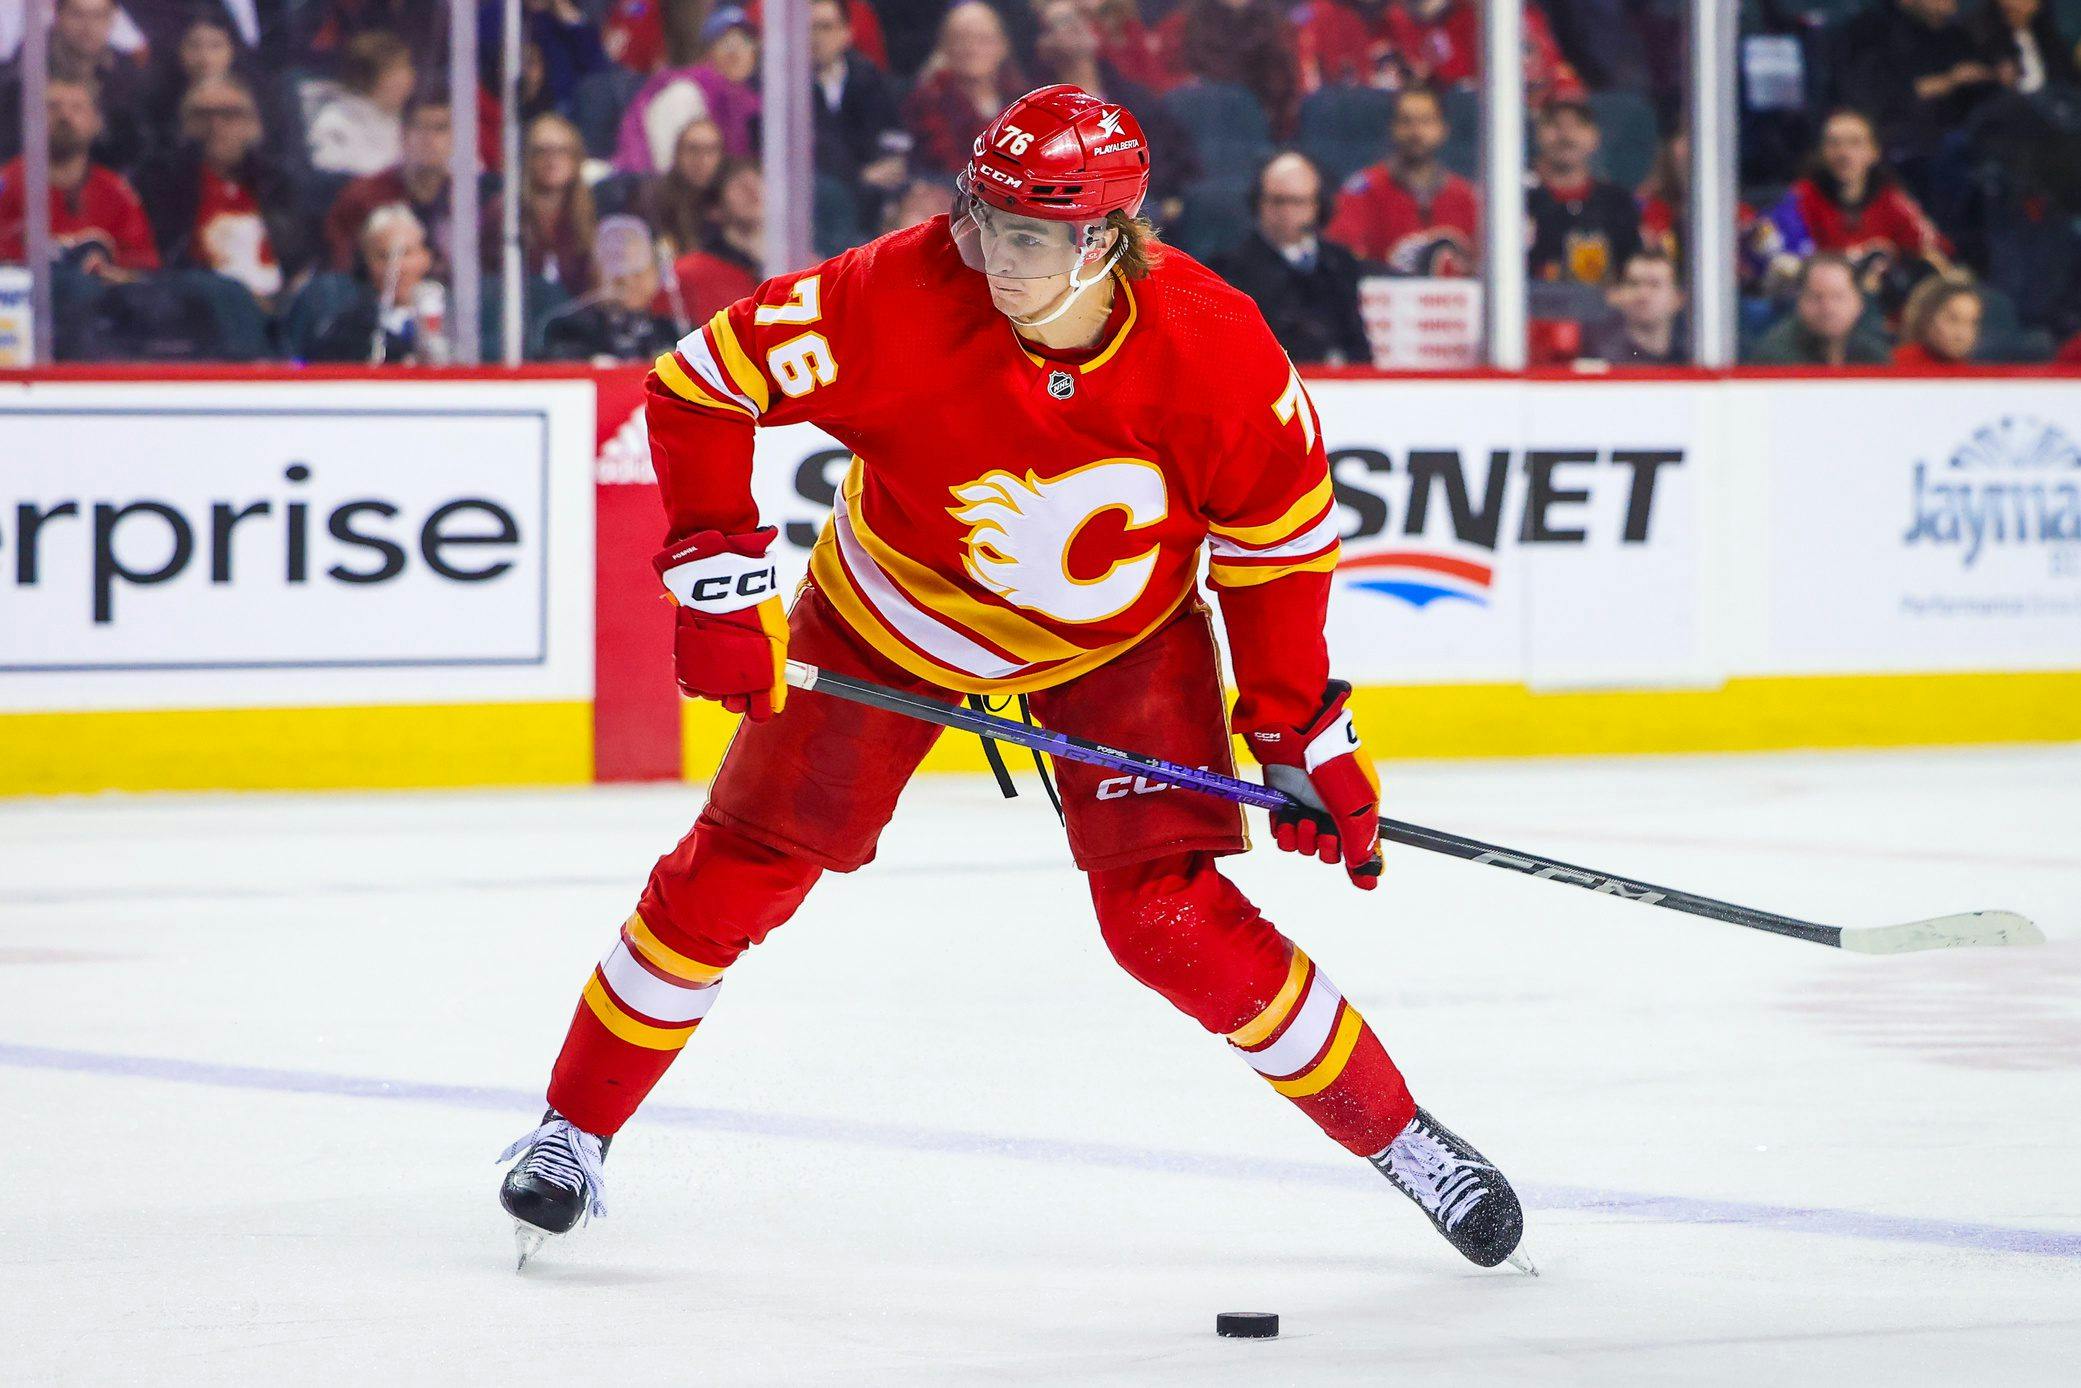 Flames forward Martin Pospisil ejected from Monday’s game for hit on Vince Dunn